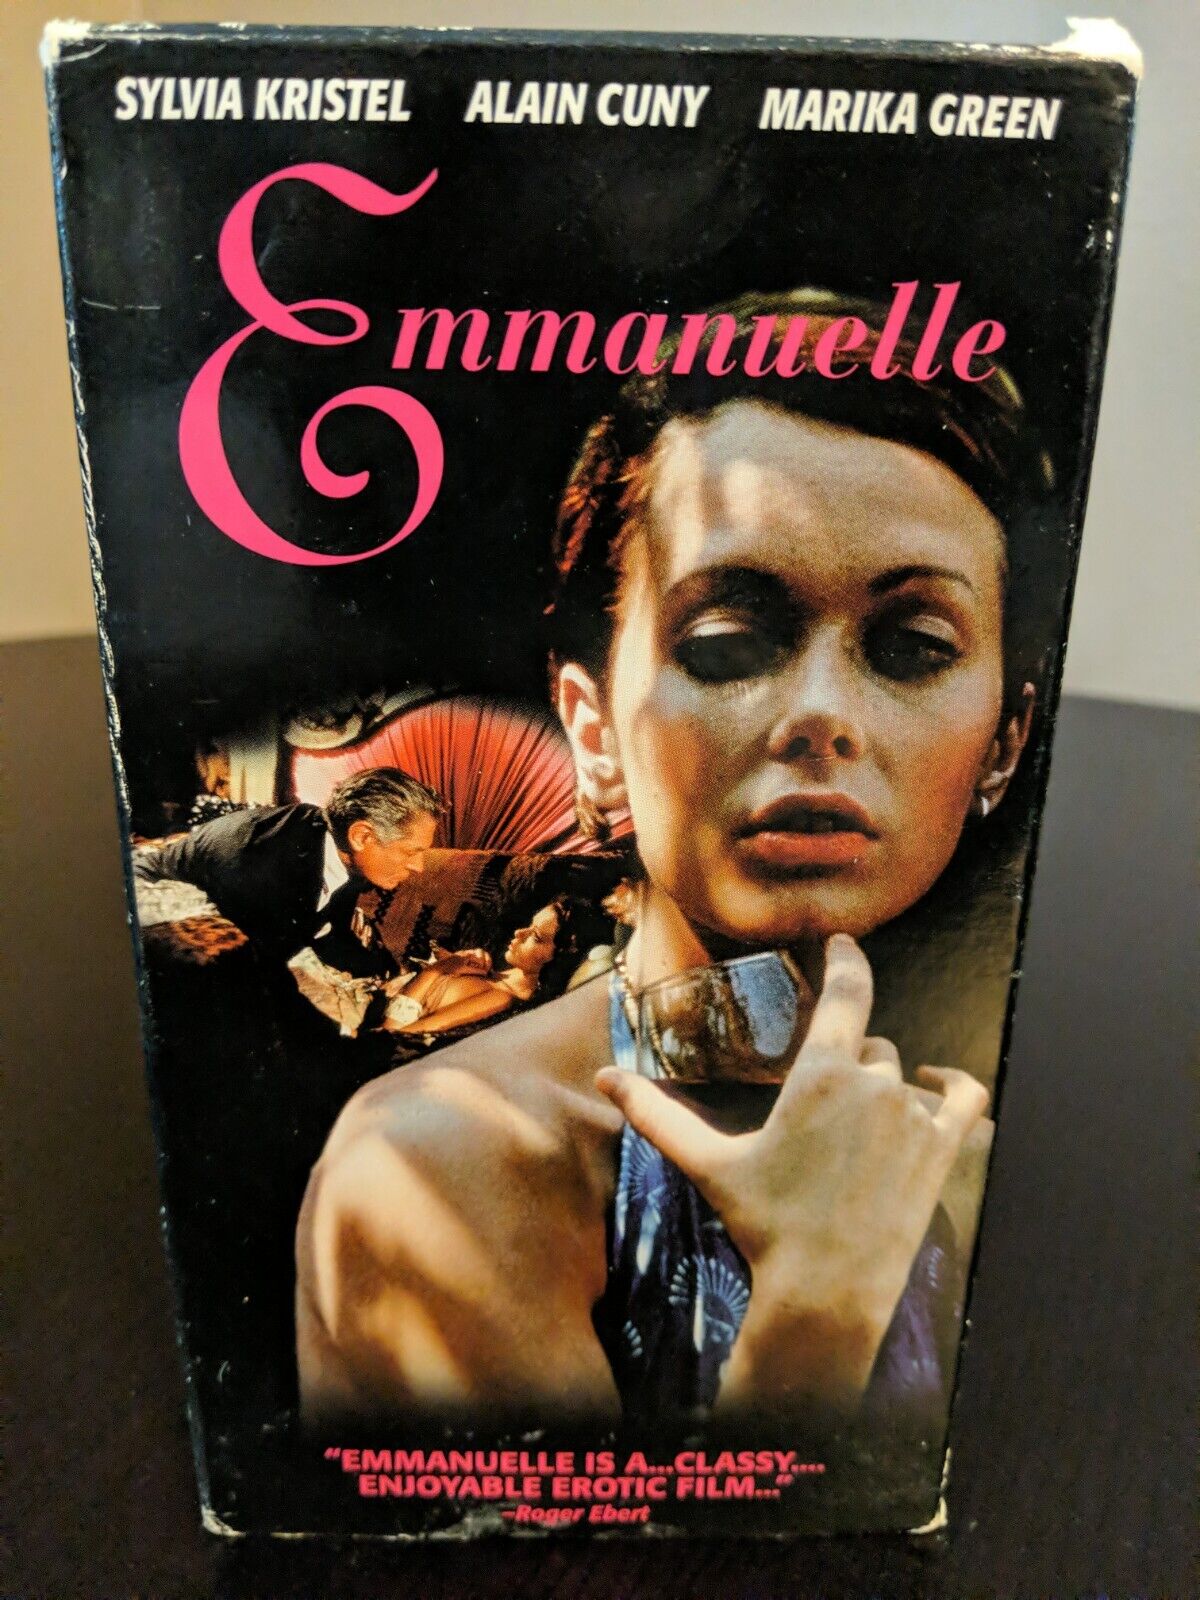 brian costley recommends Emmanuelle Film 1974 Watch Online